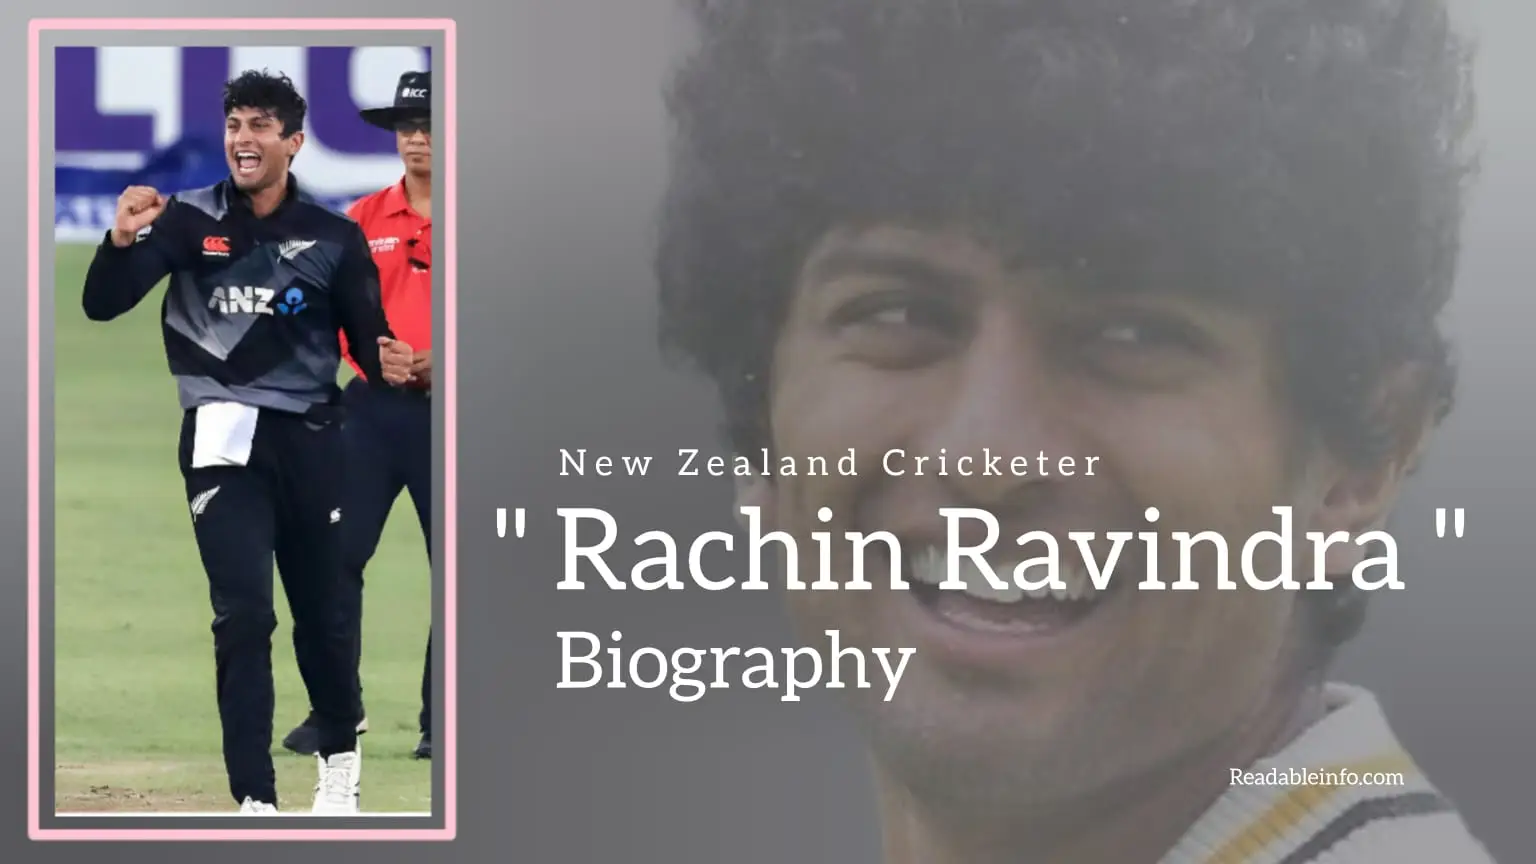 You are currently viewing Rachin Ravindra Biography (New Zealand Cricketer)